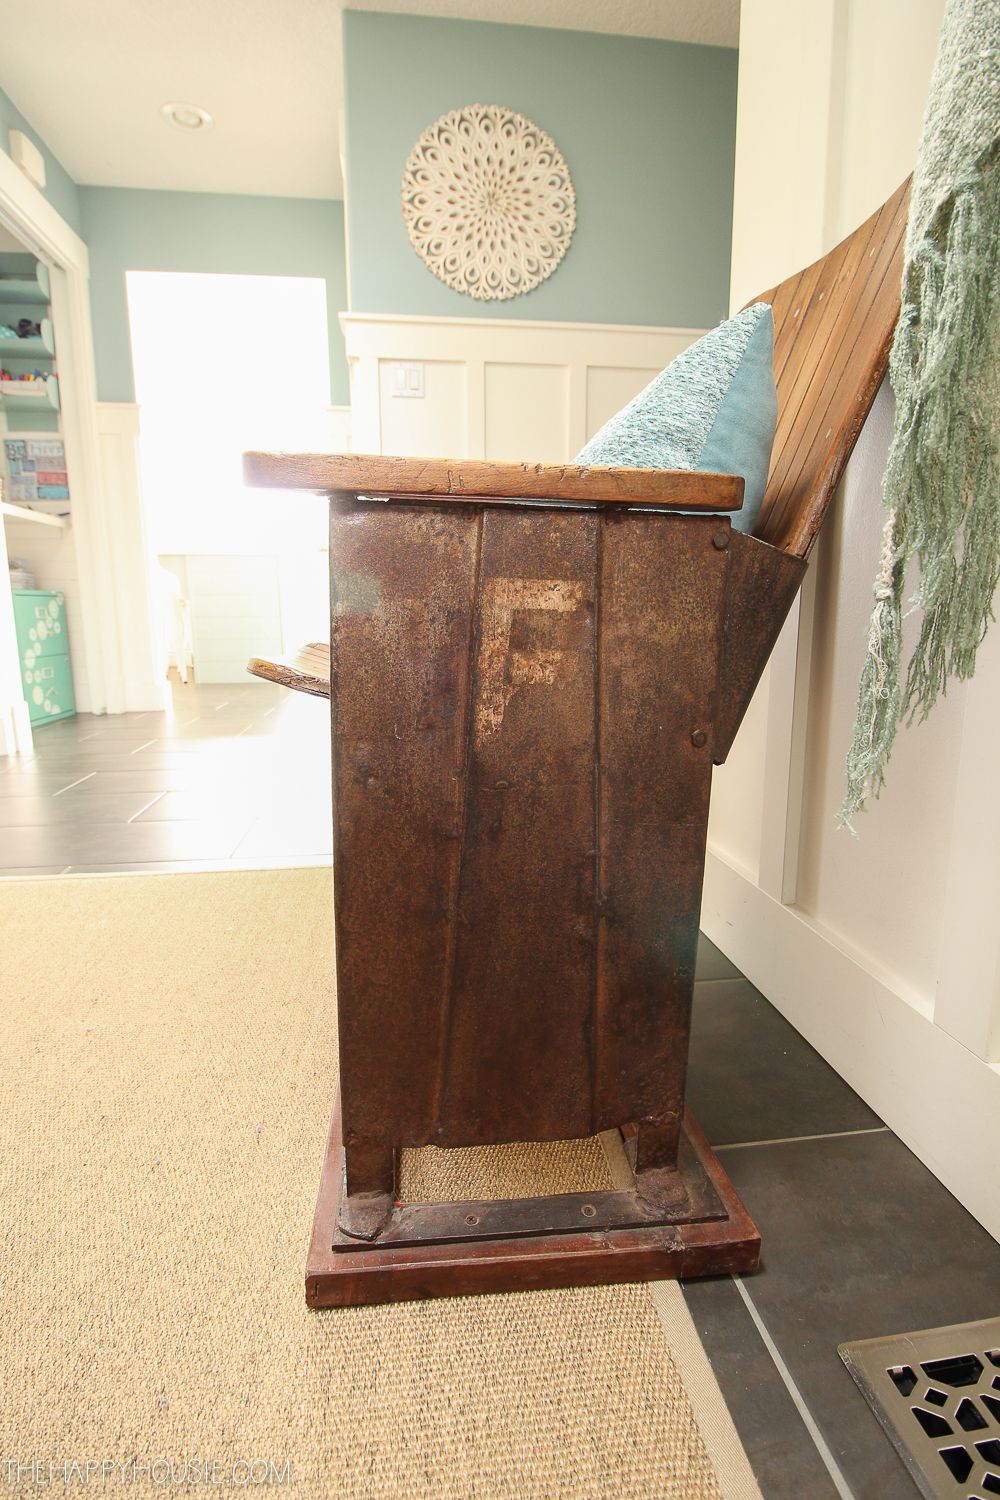 An antique looking chair in the front entryway.